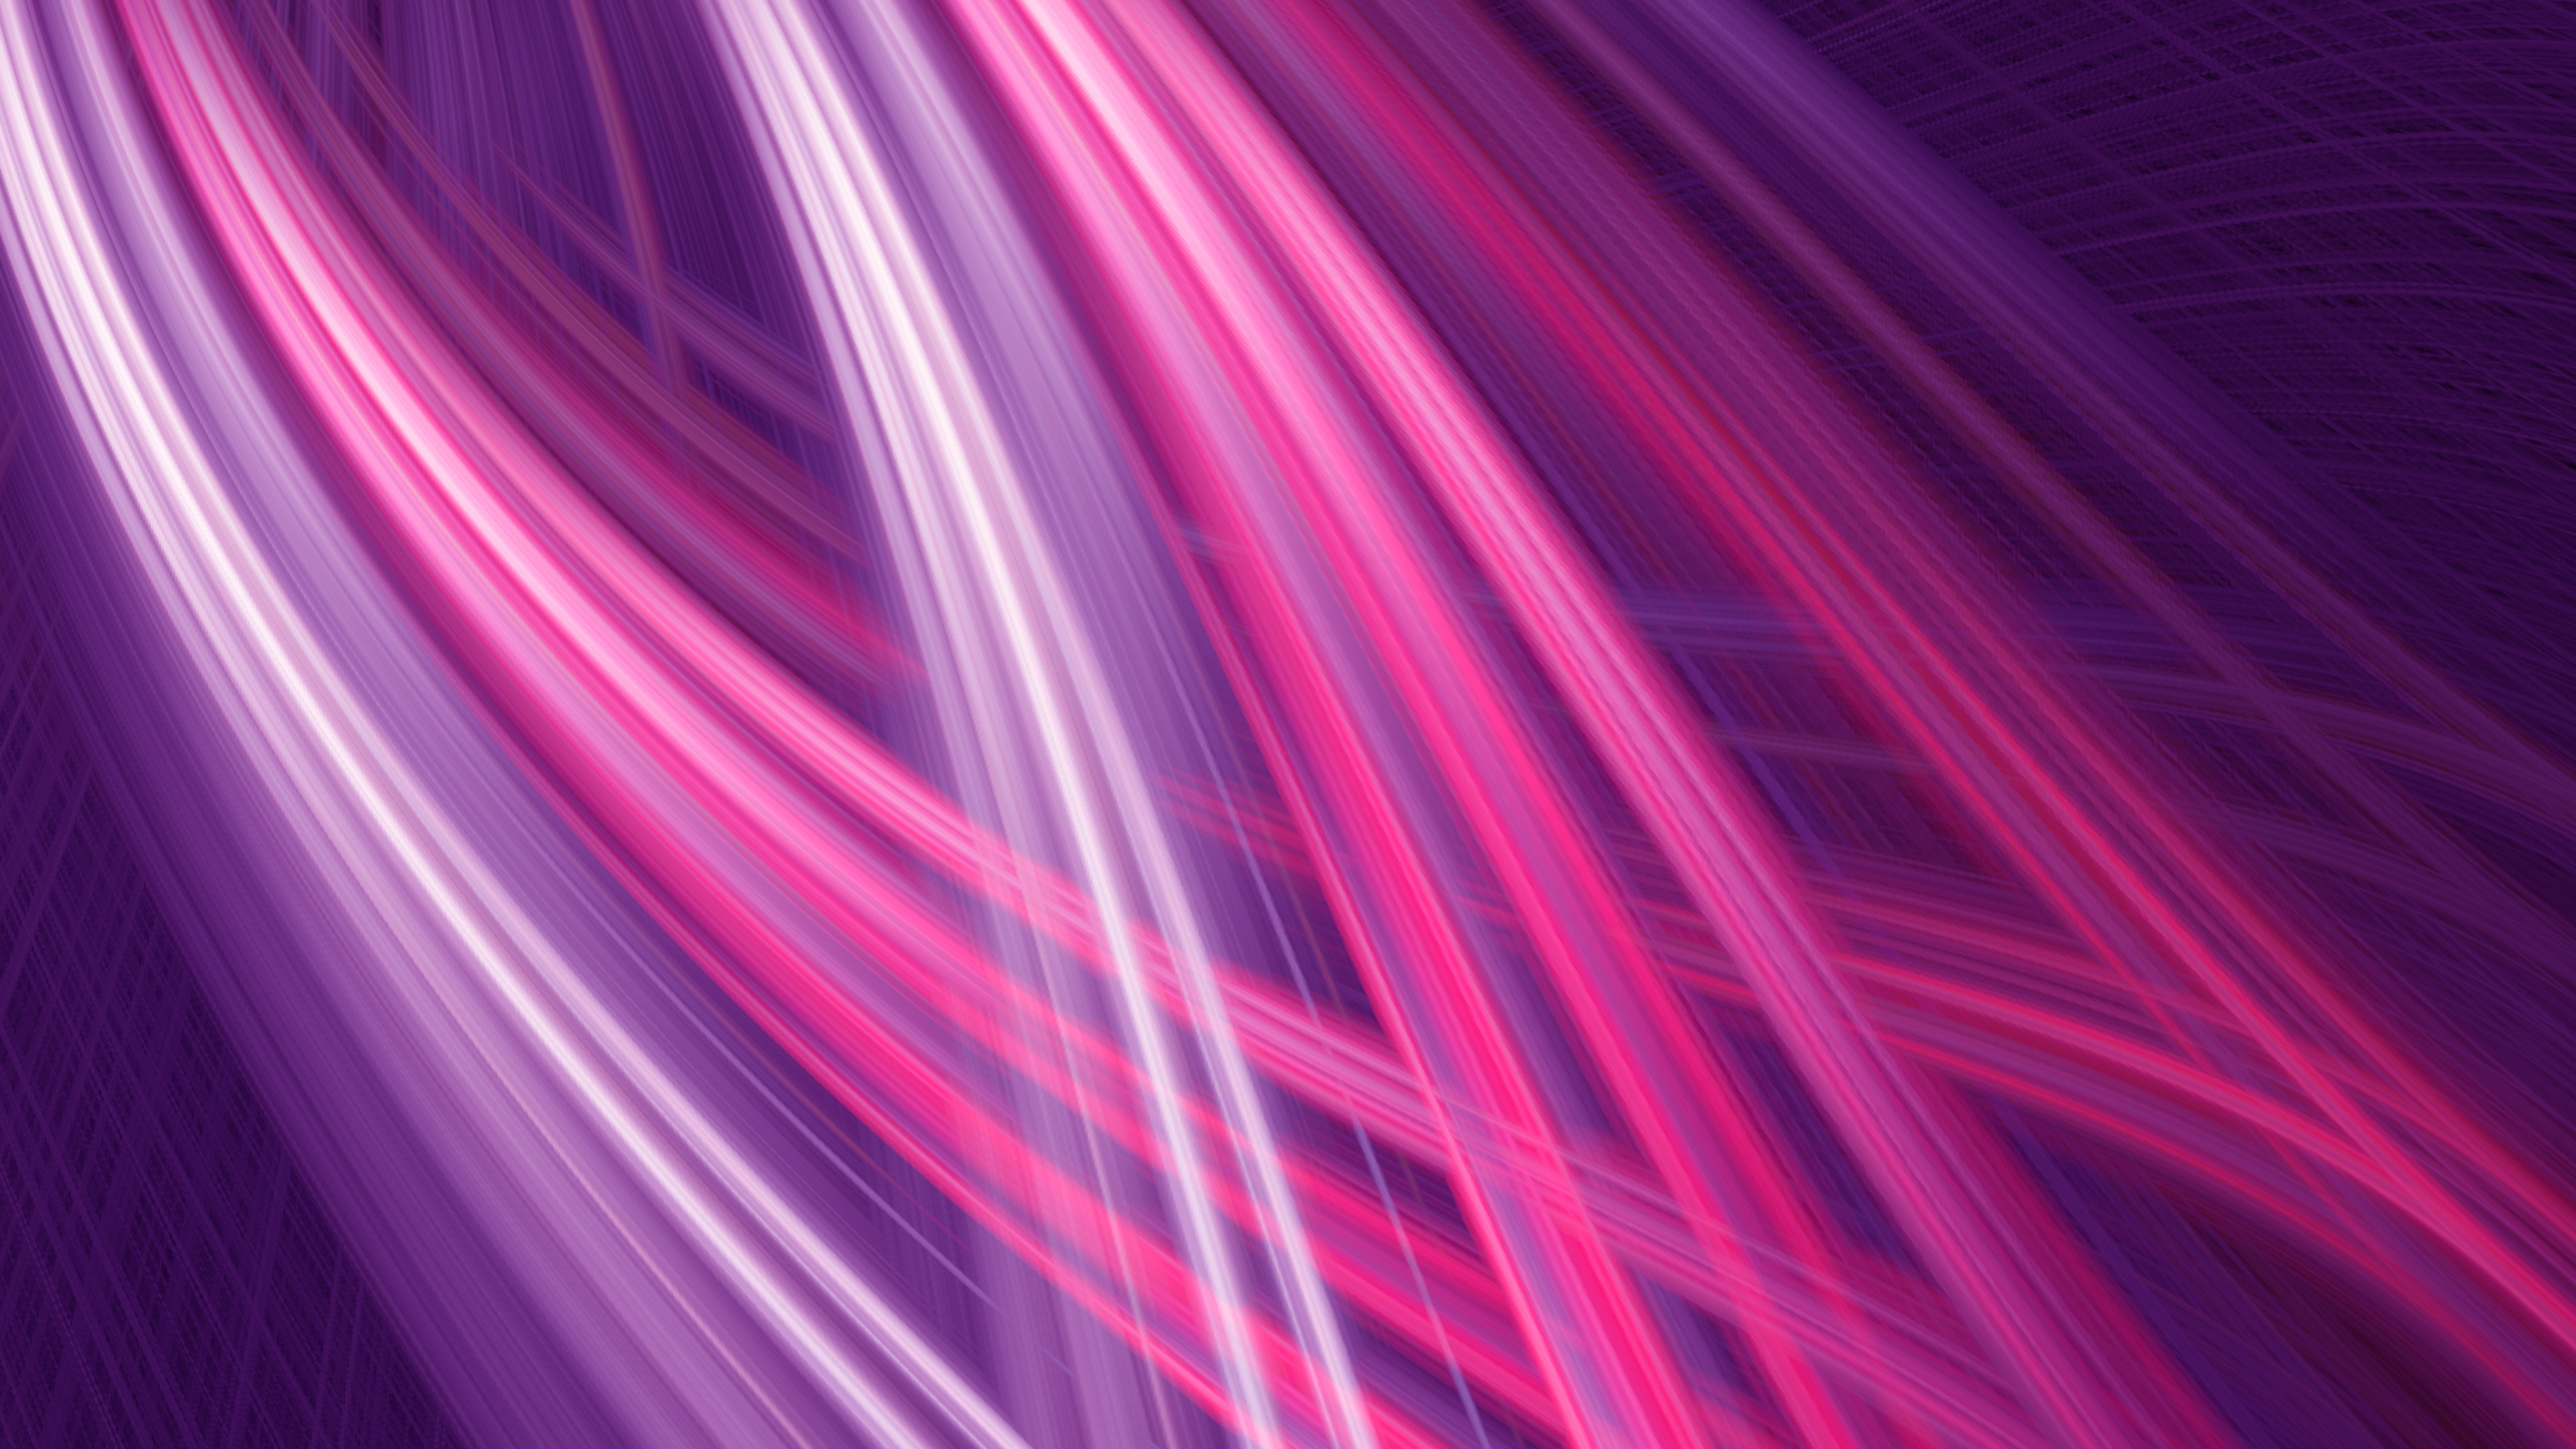 Abstract Swirls Wallpaper 4K, Purple background, Abstract, #5942